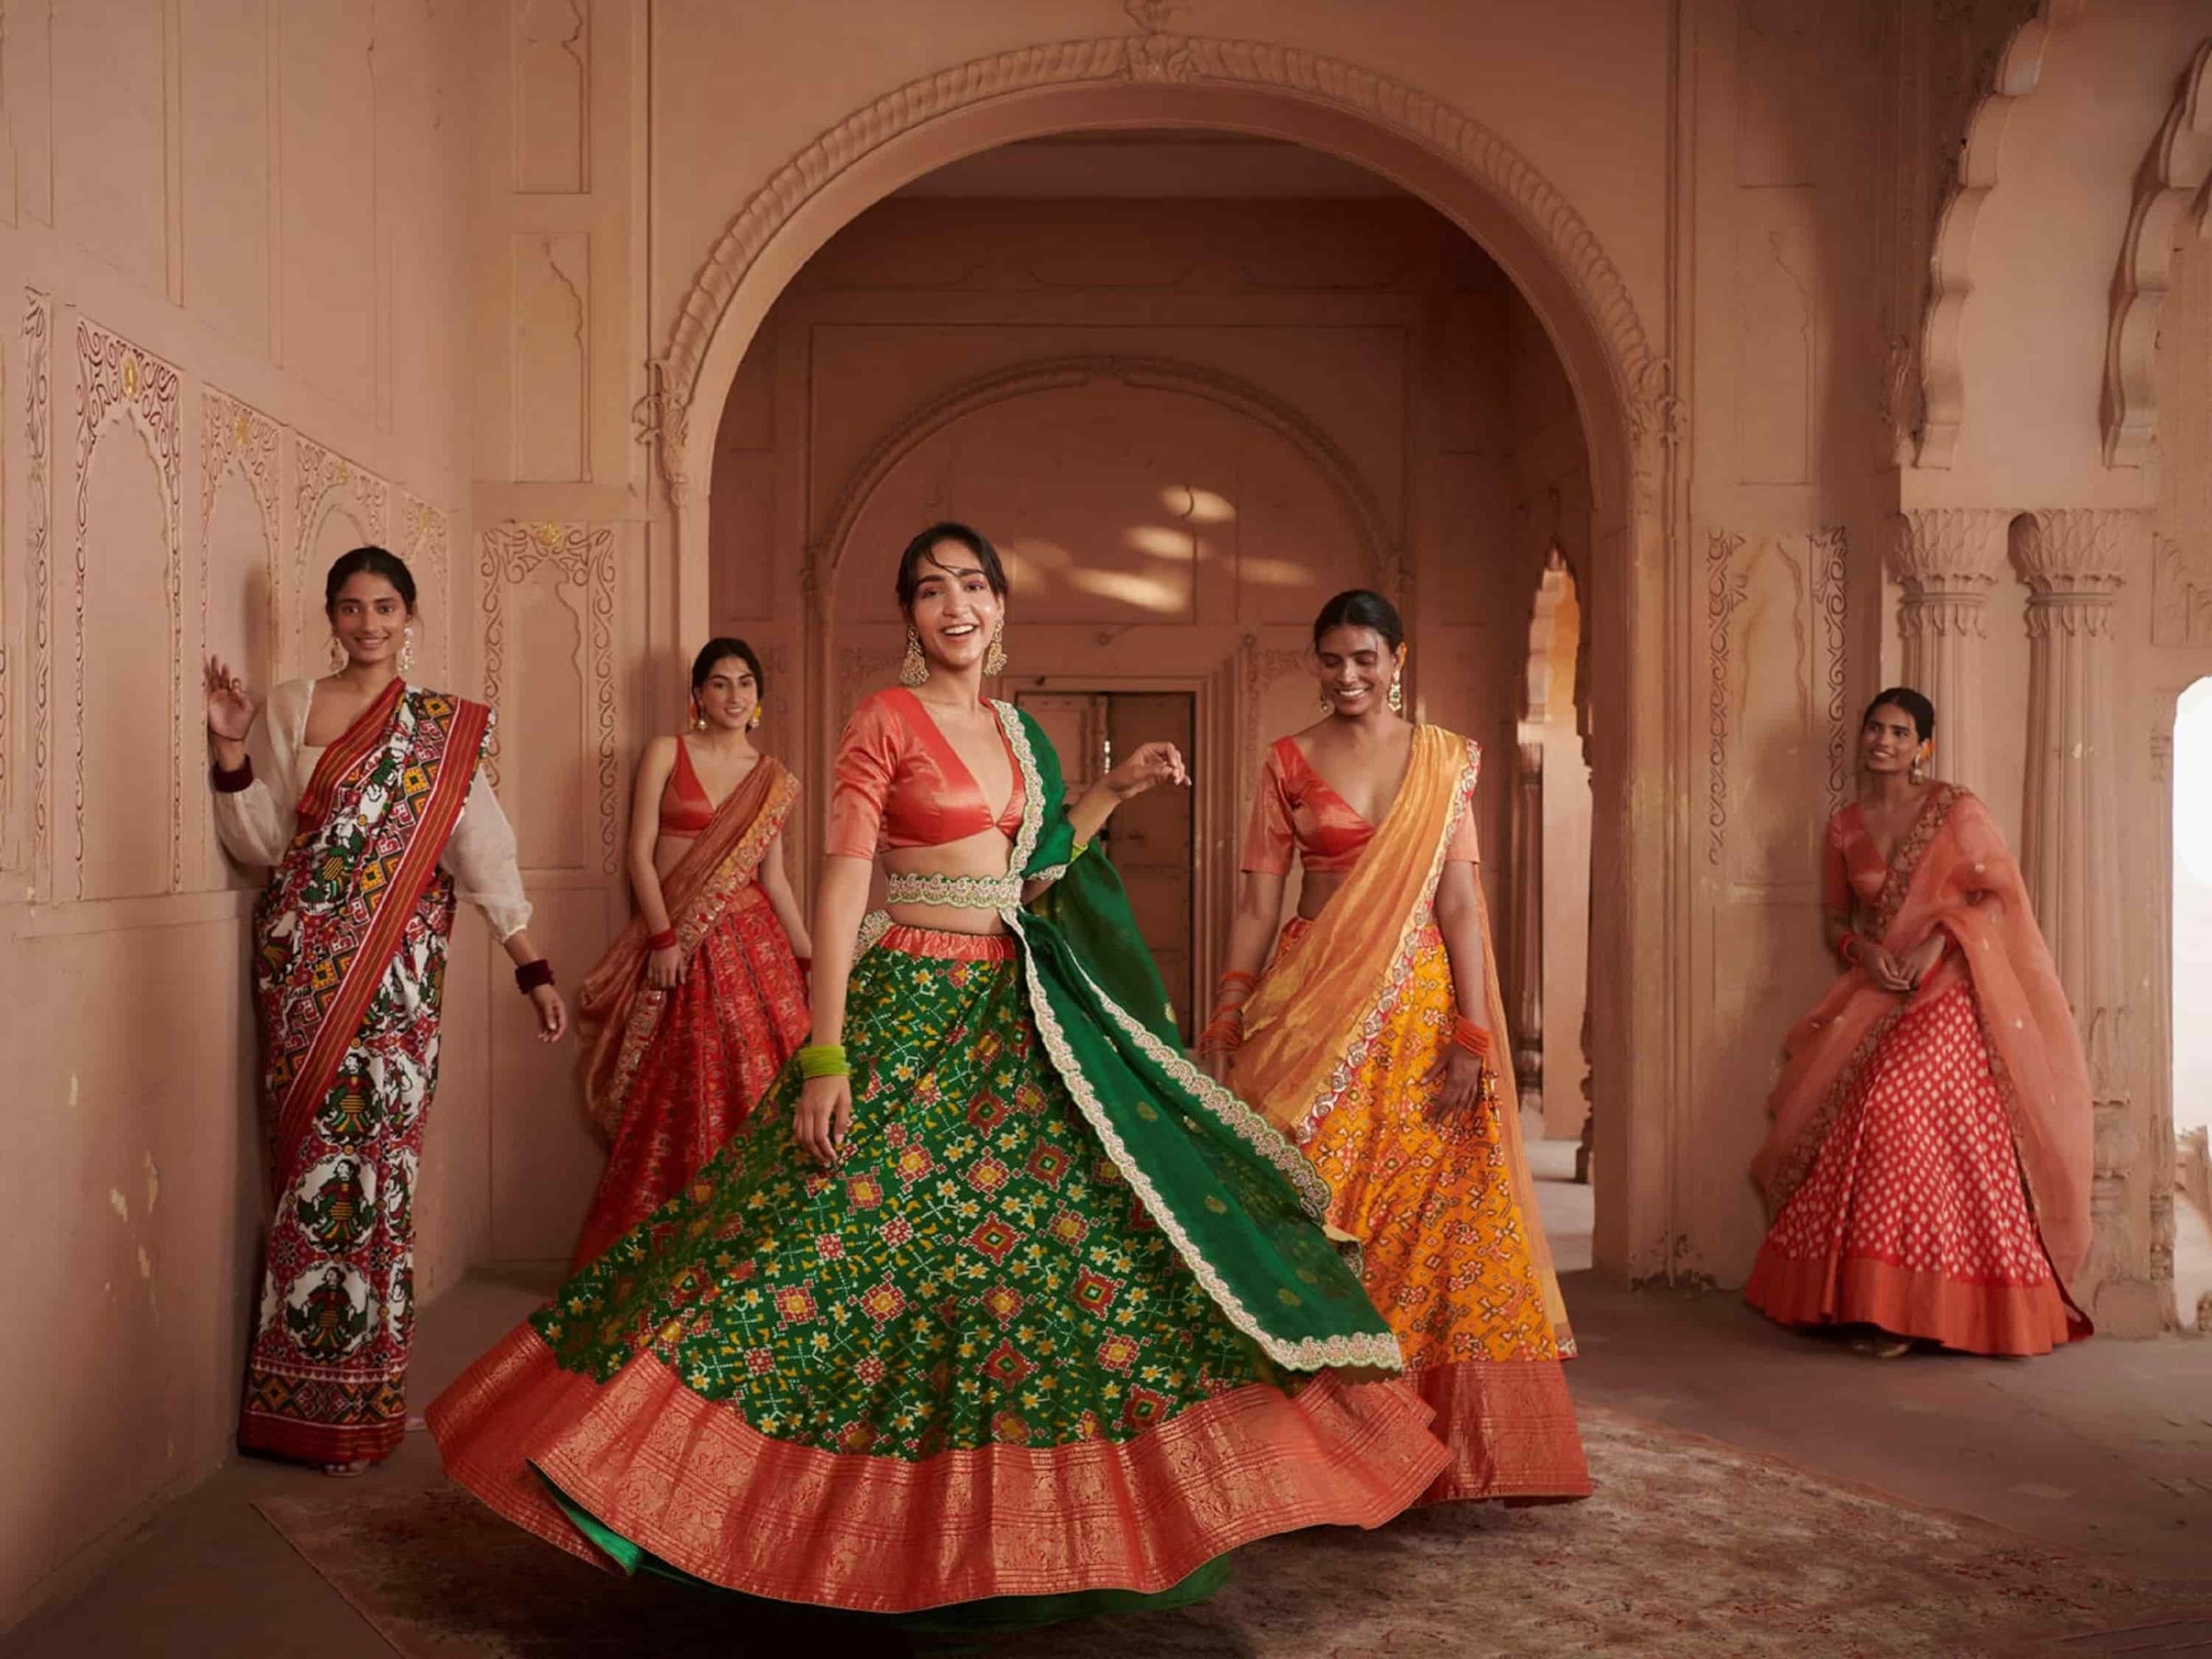 Bring out your chic style this Diwali with these traditional attires 